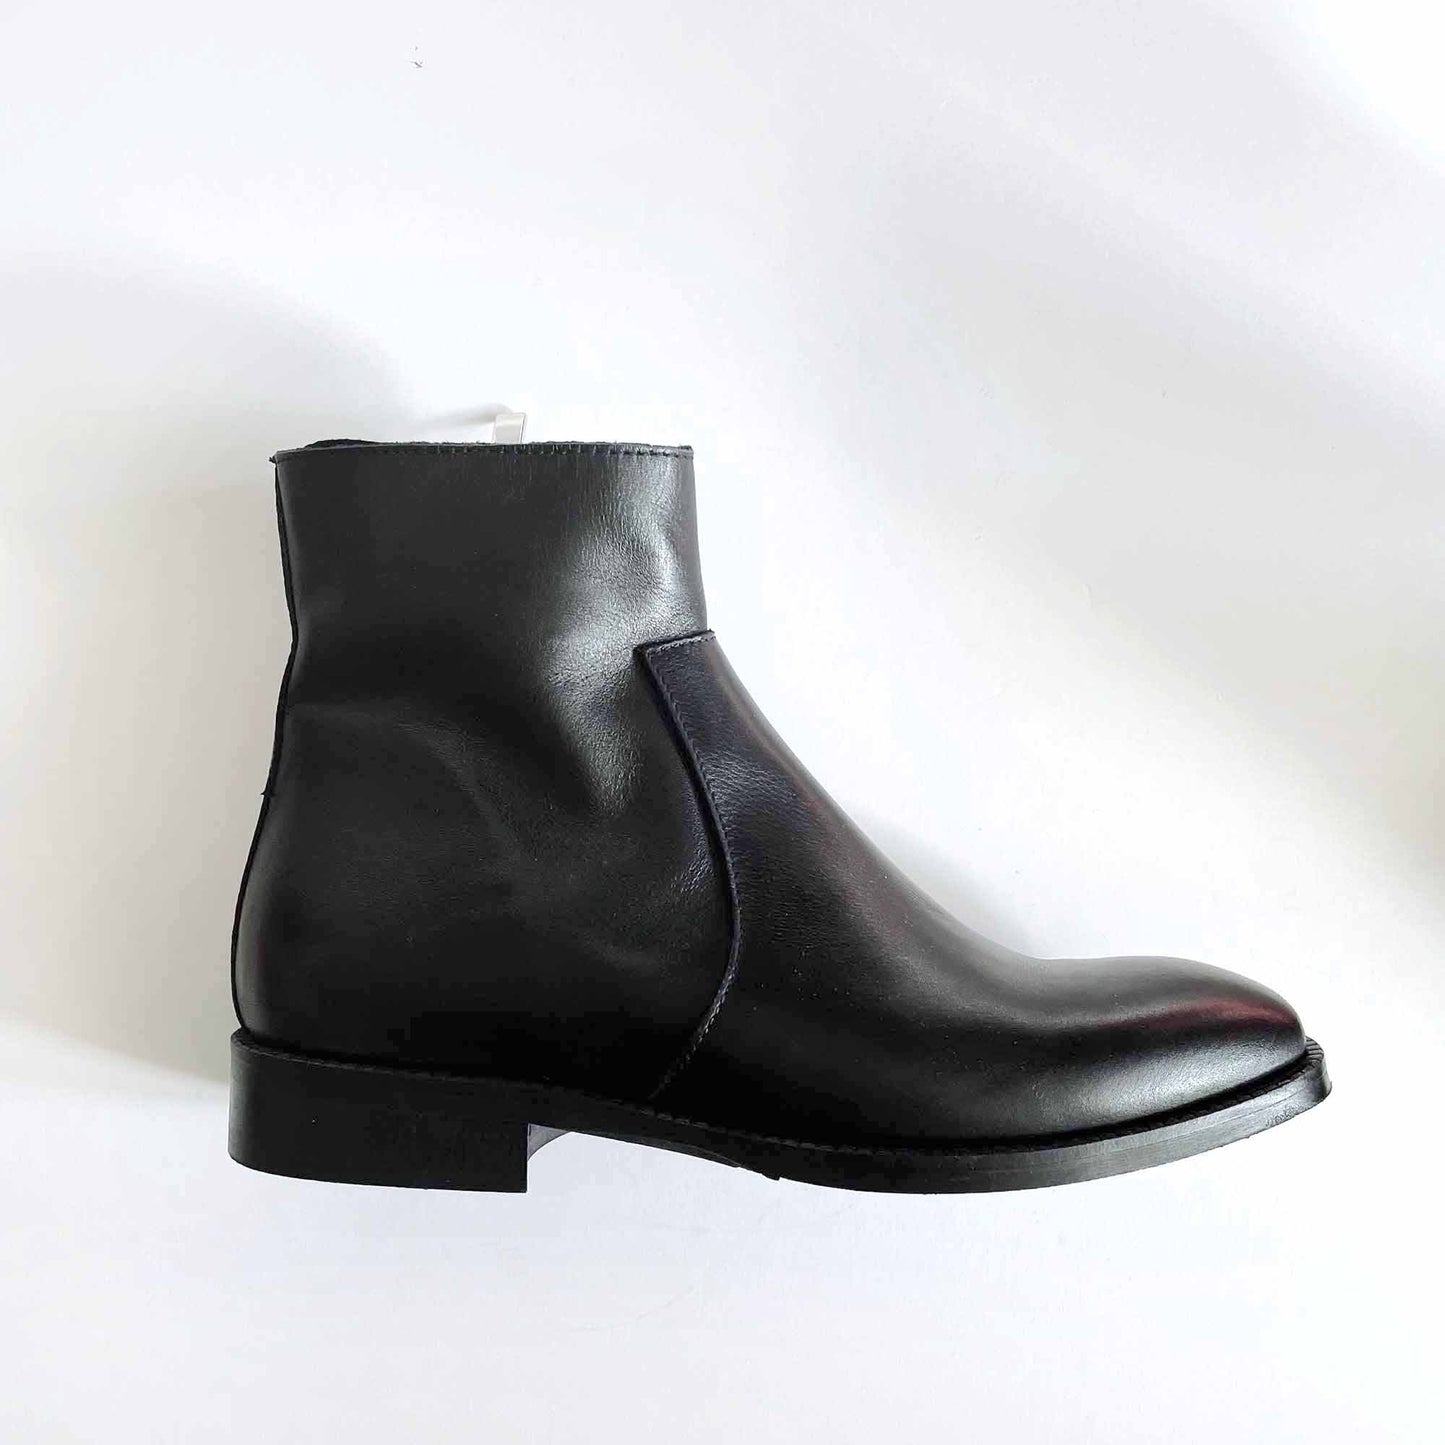 ron white black leather flat ankle boots - size 35